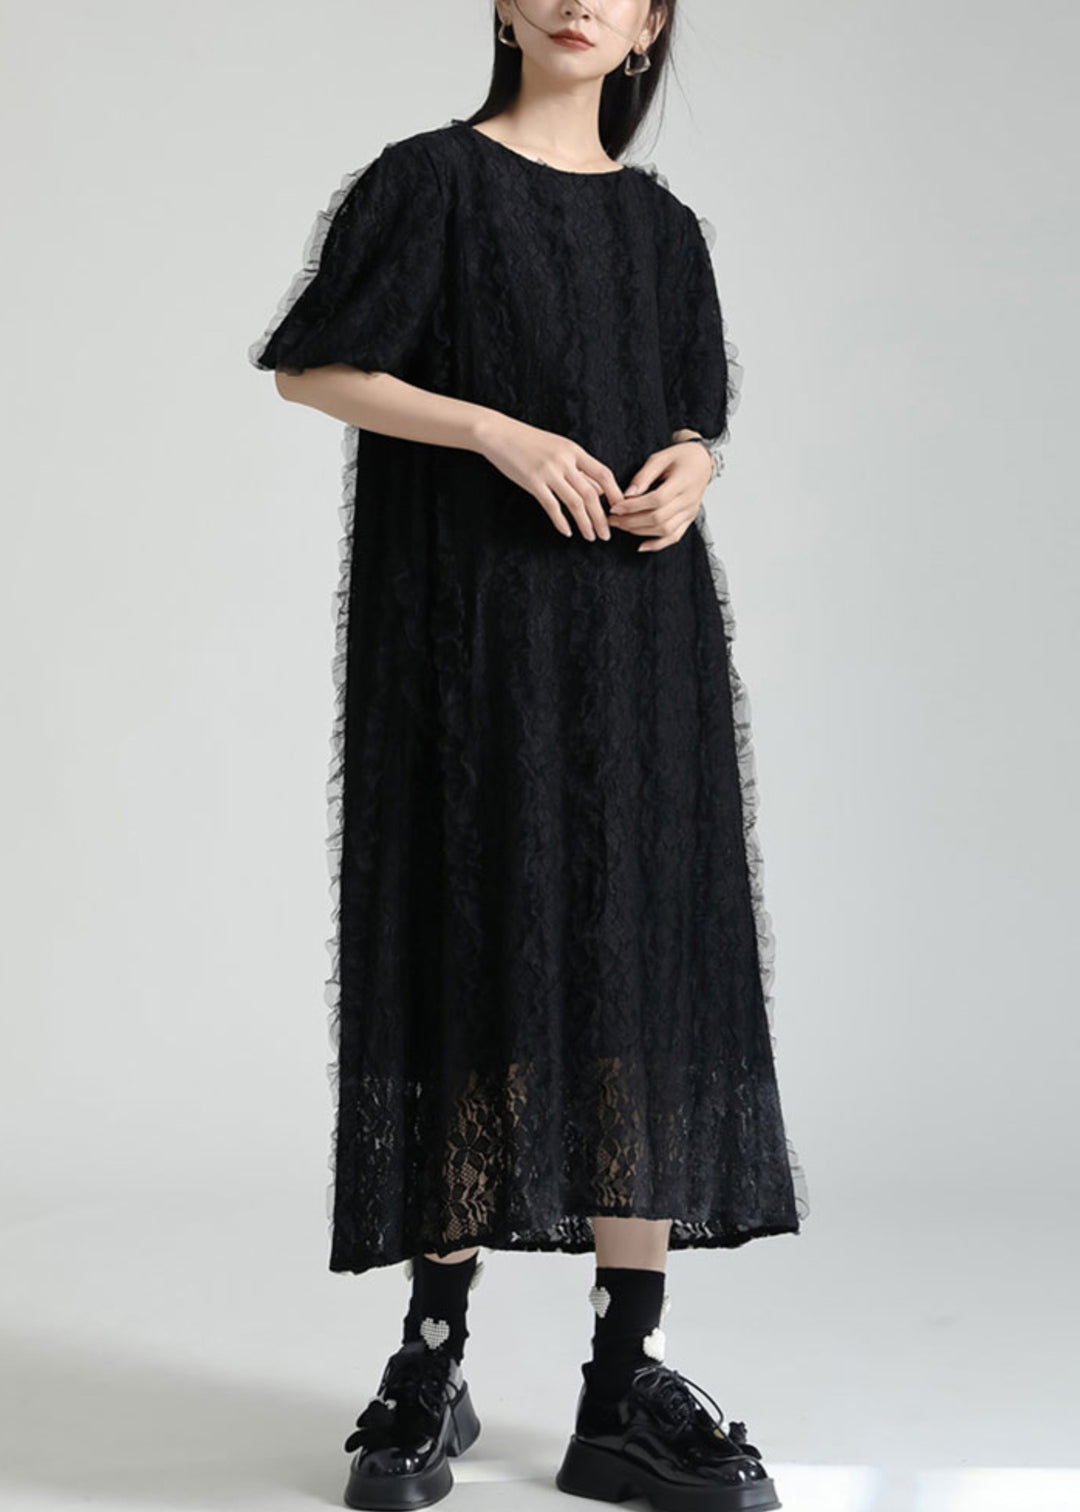 French Black O Neck Patchwork Lace Dresses Summer